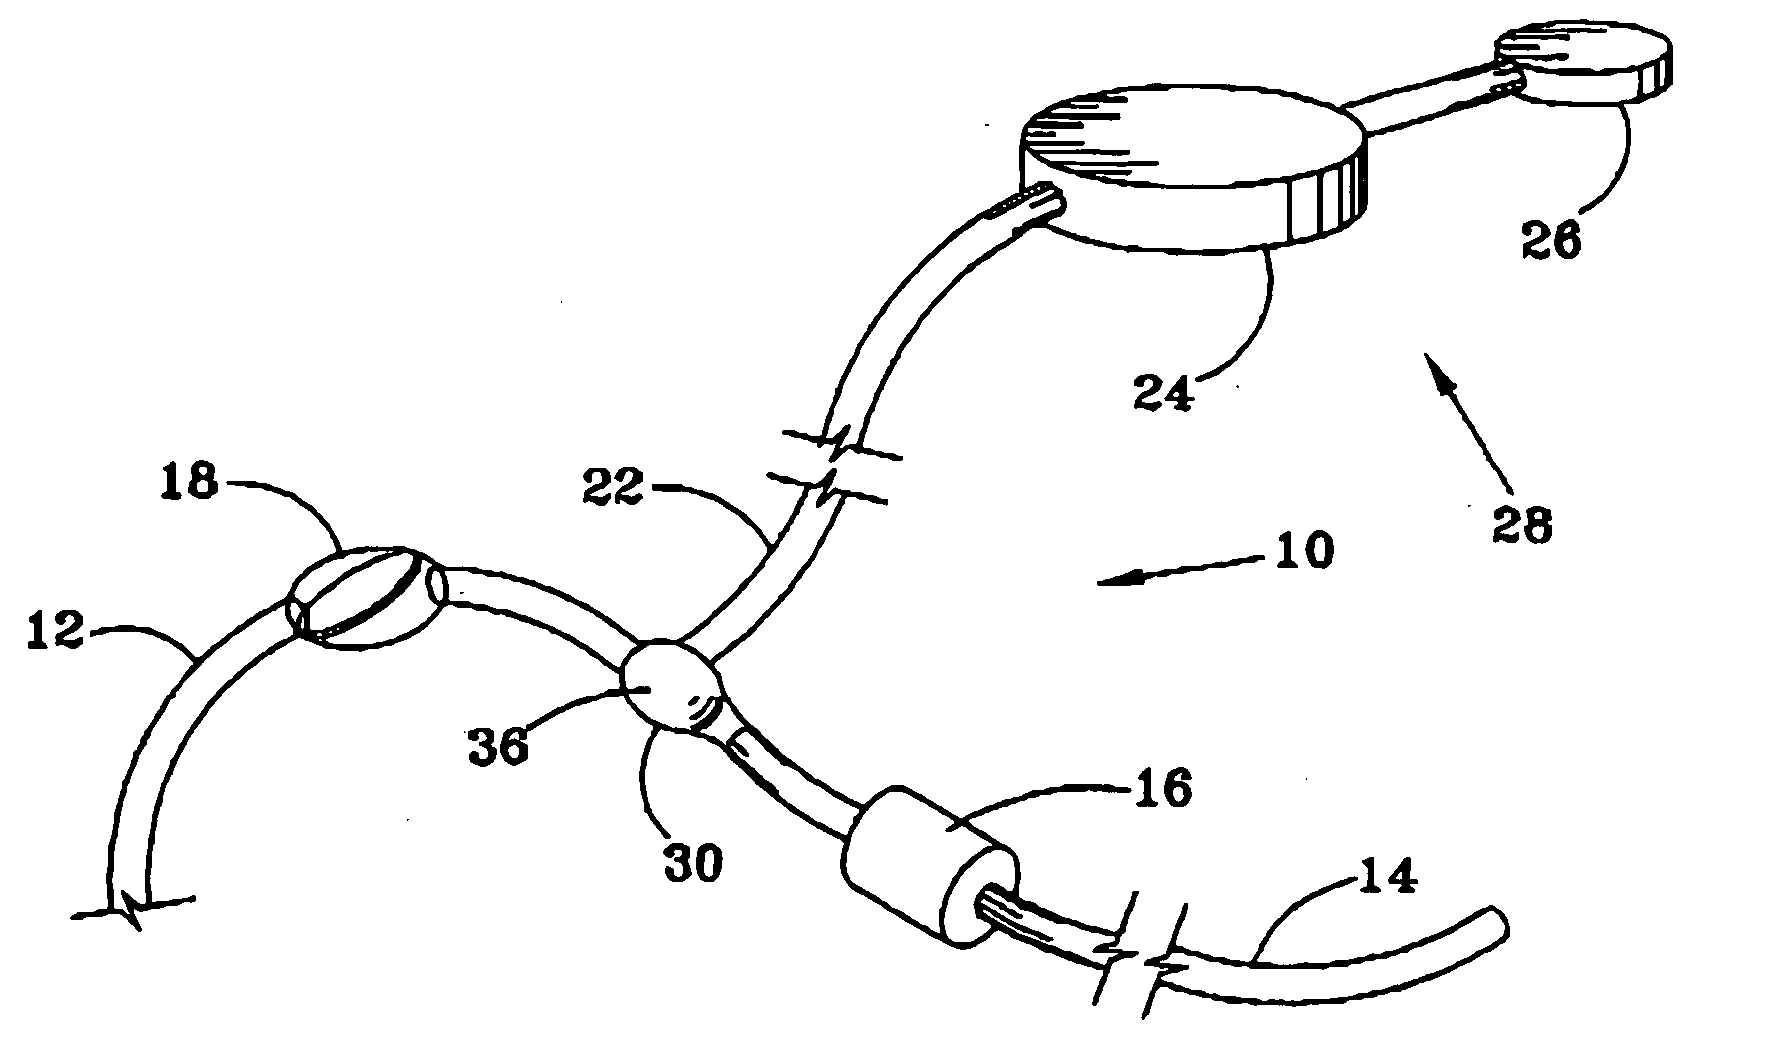 Implantable shunt system and method